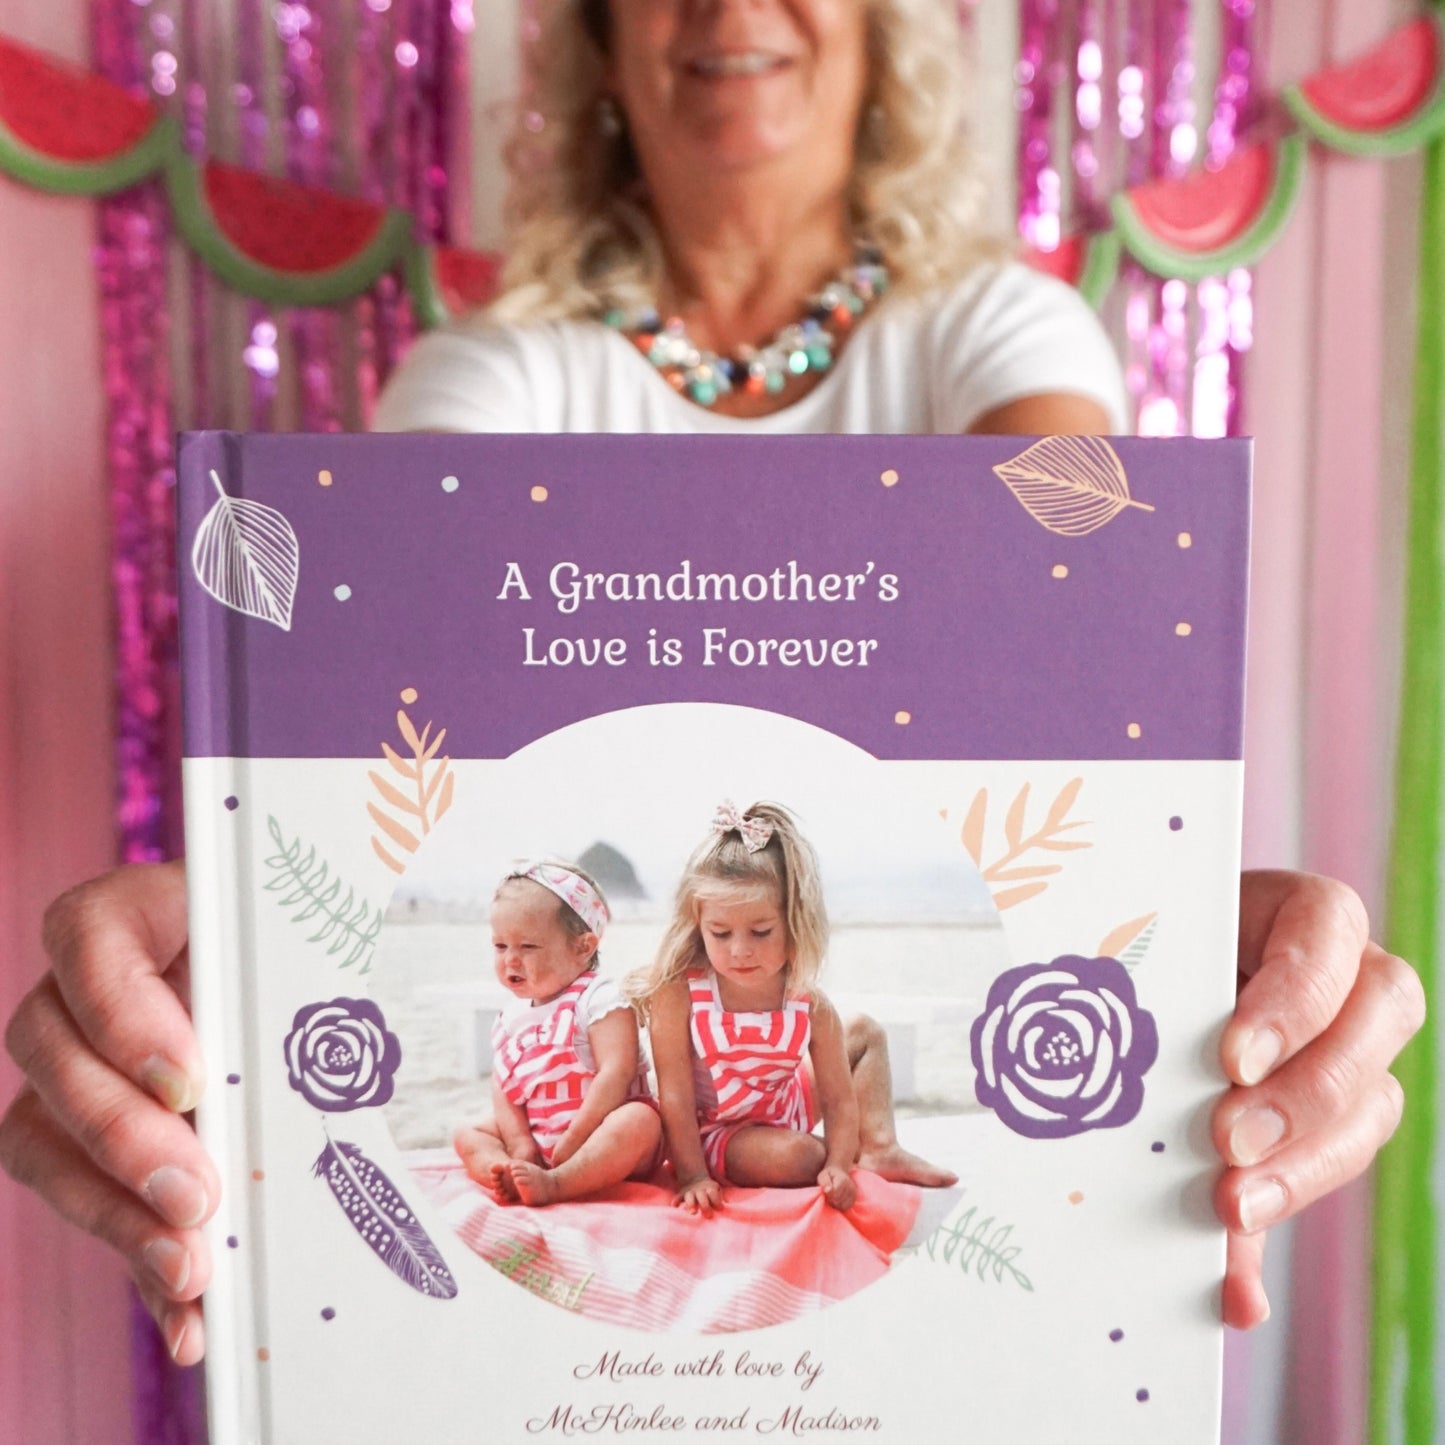 Gift for grandma from grandchildren. Add Personalized Photos.